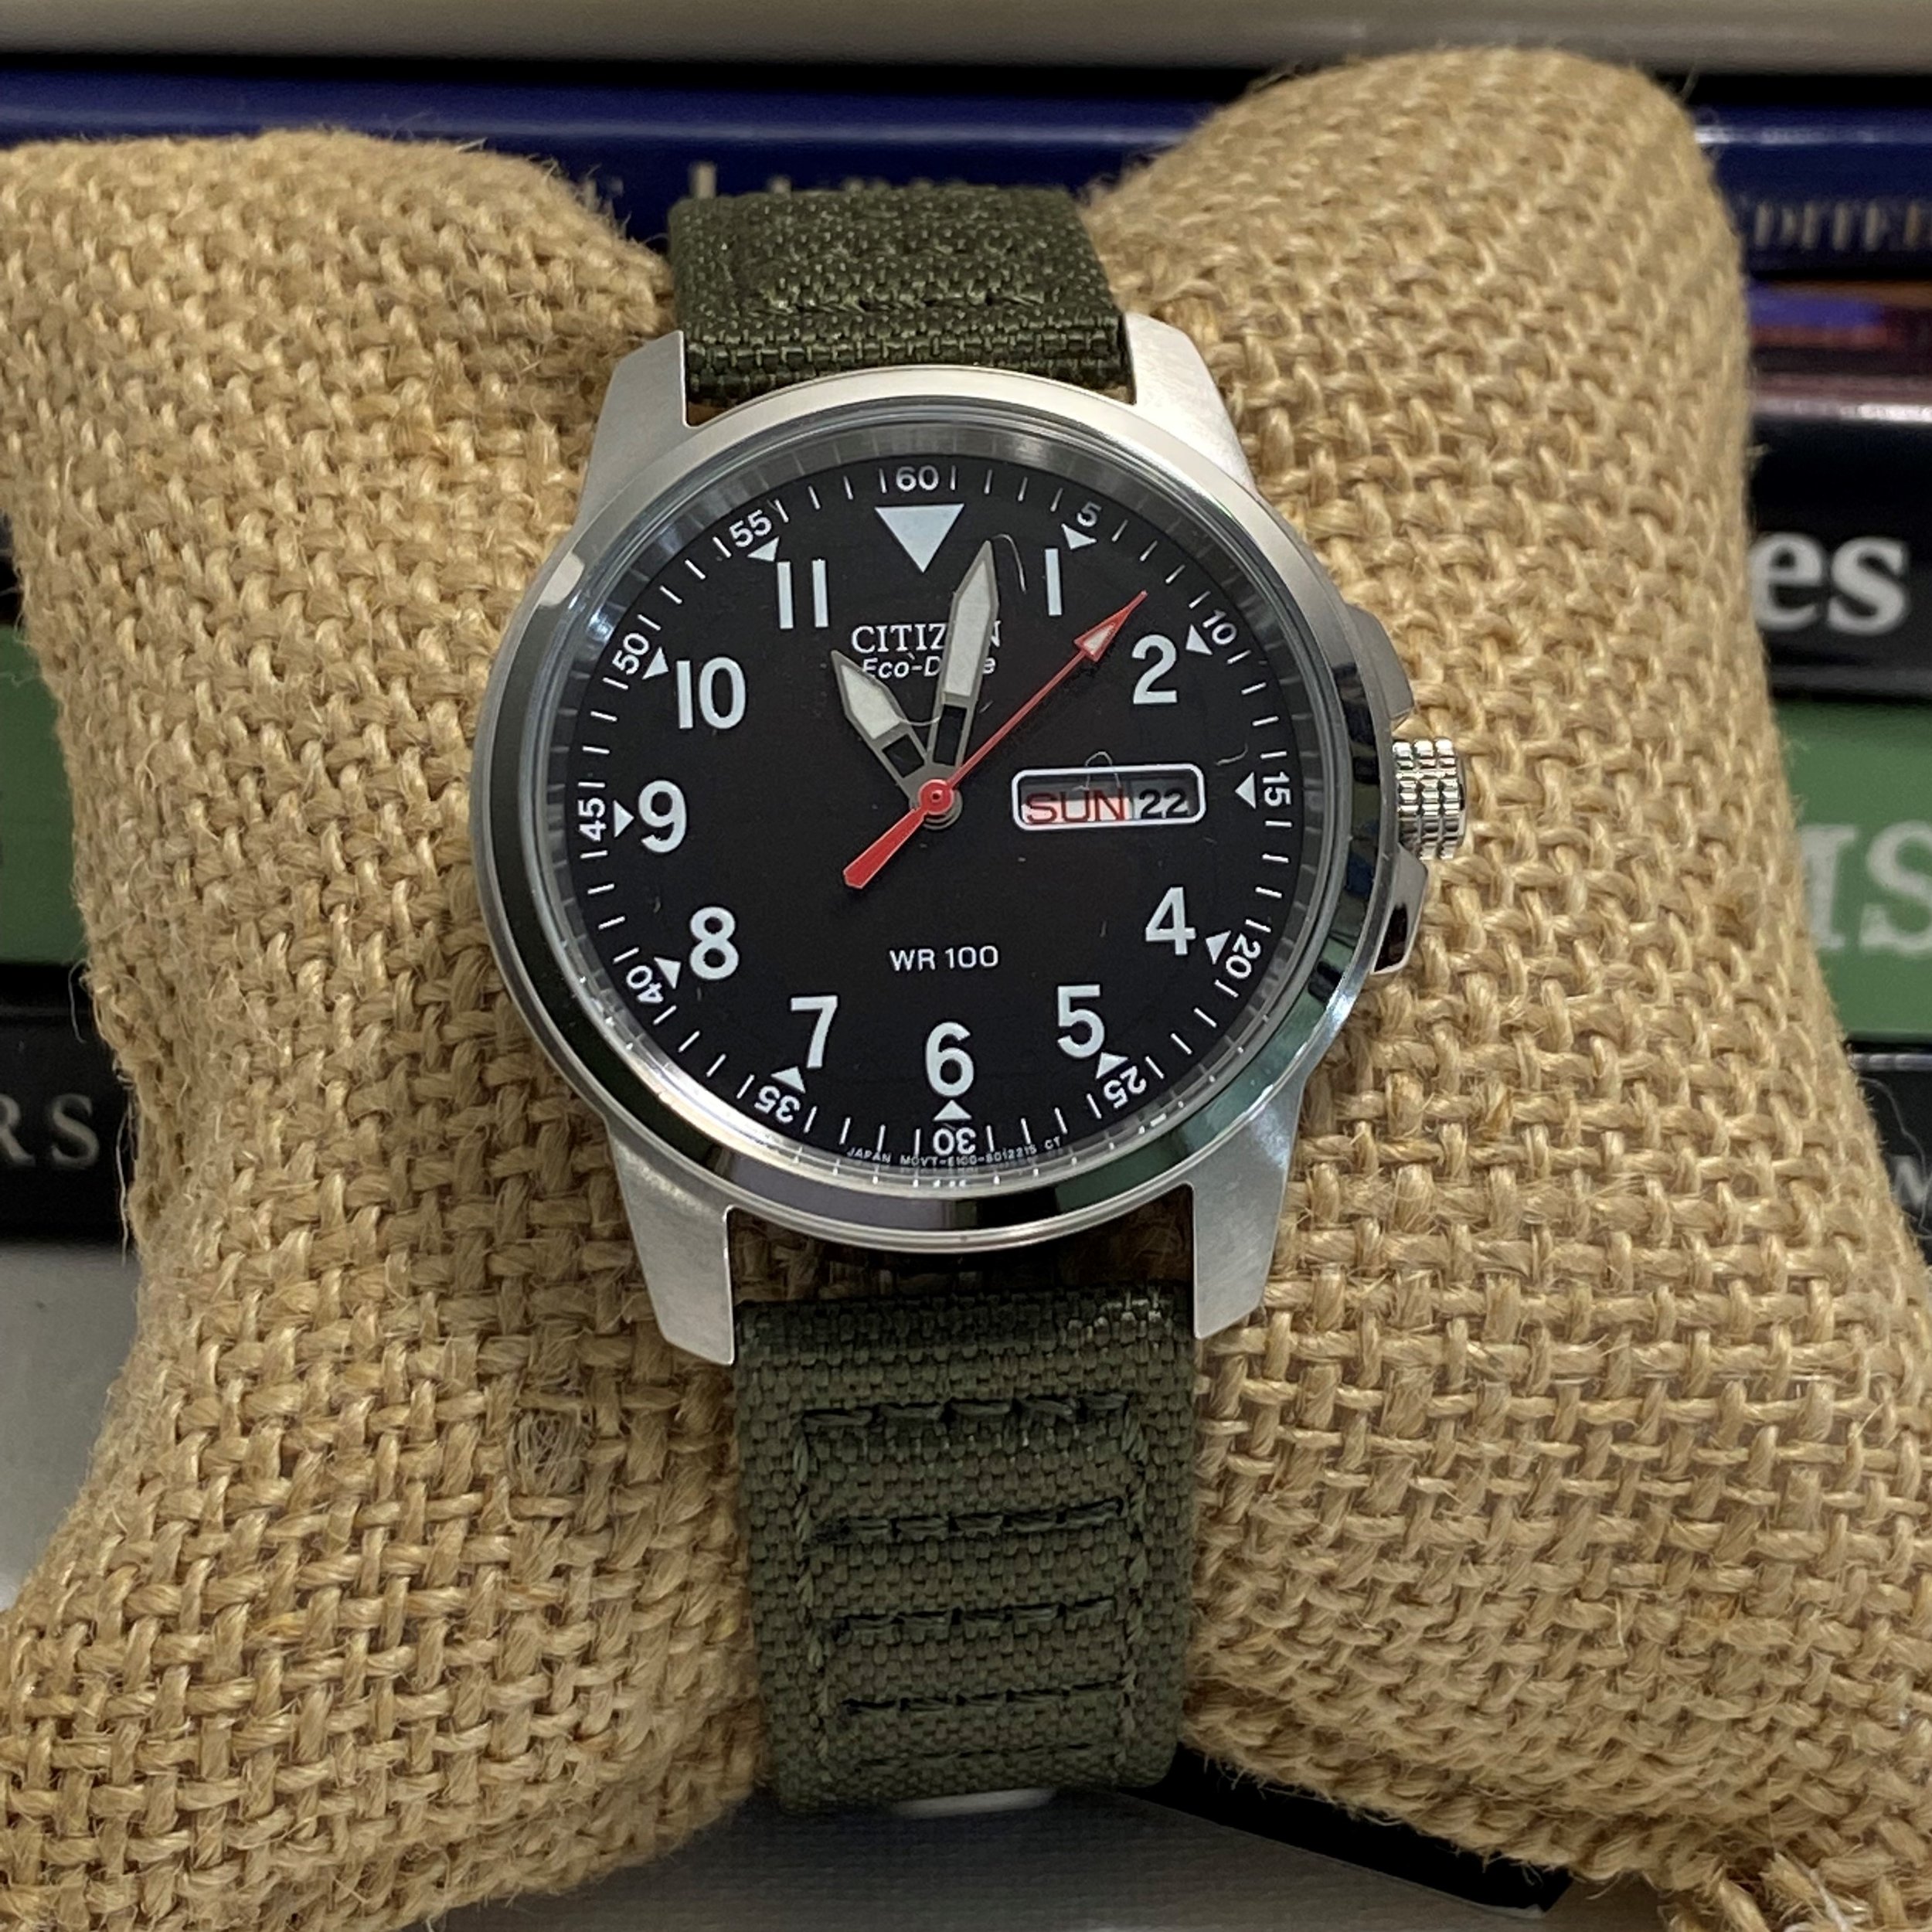 Seiko Strap Men's Watch — The Watchmaker's Daughter